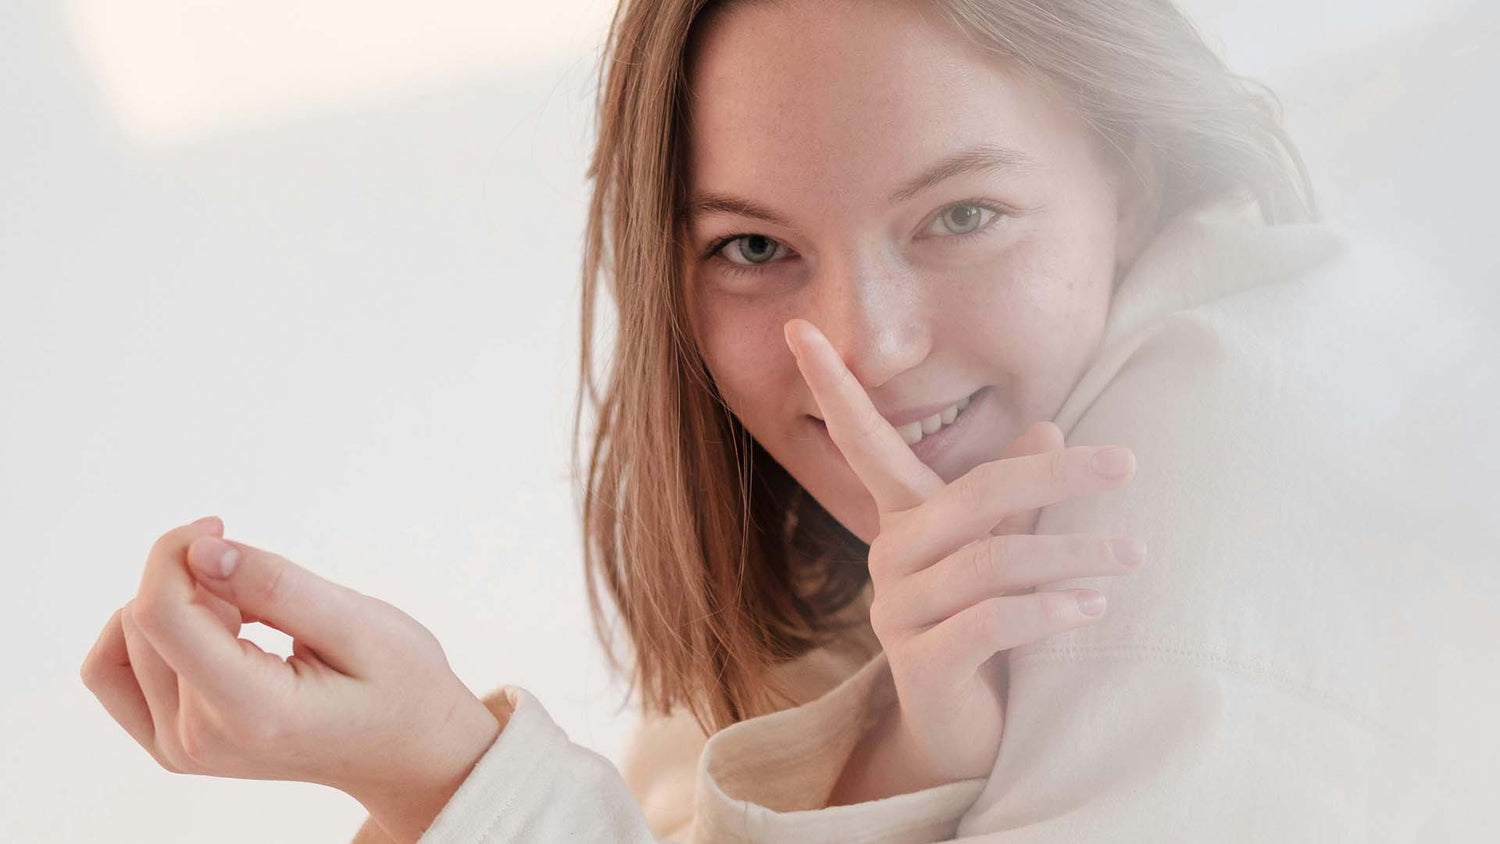 A woman smiles as she gestures with her index finger over her mouth.